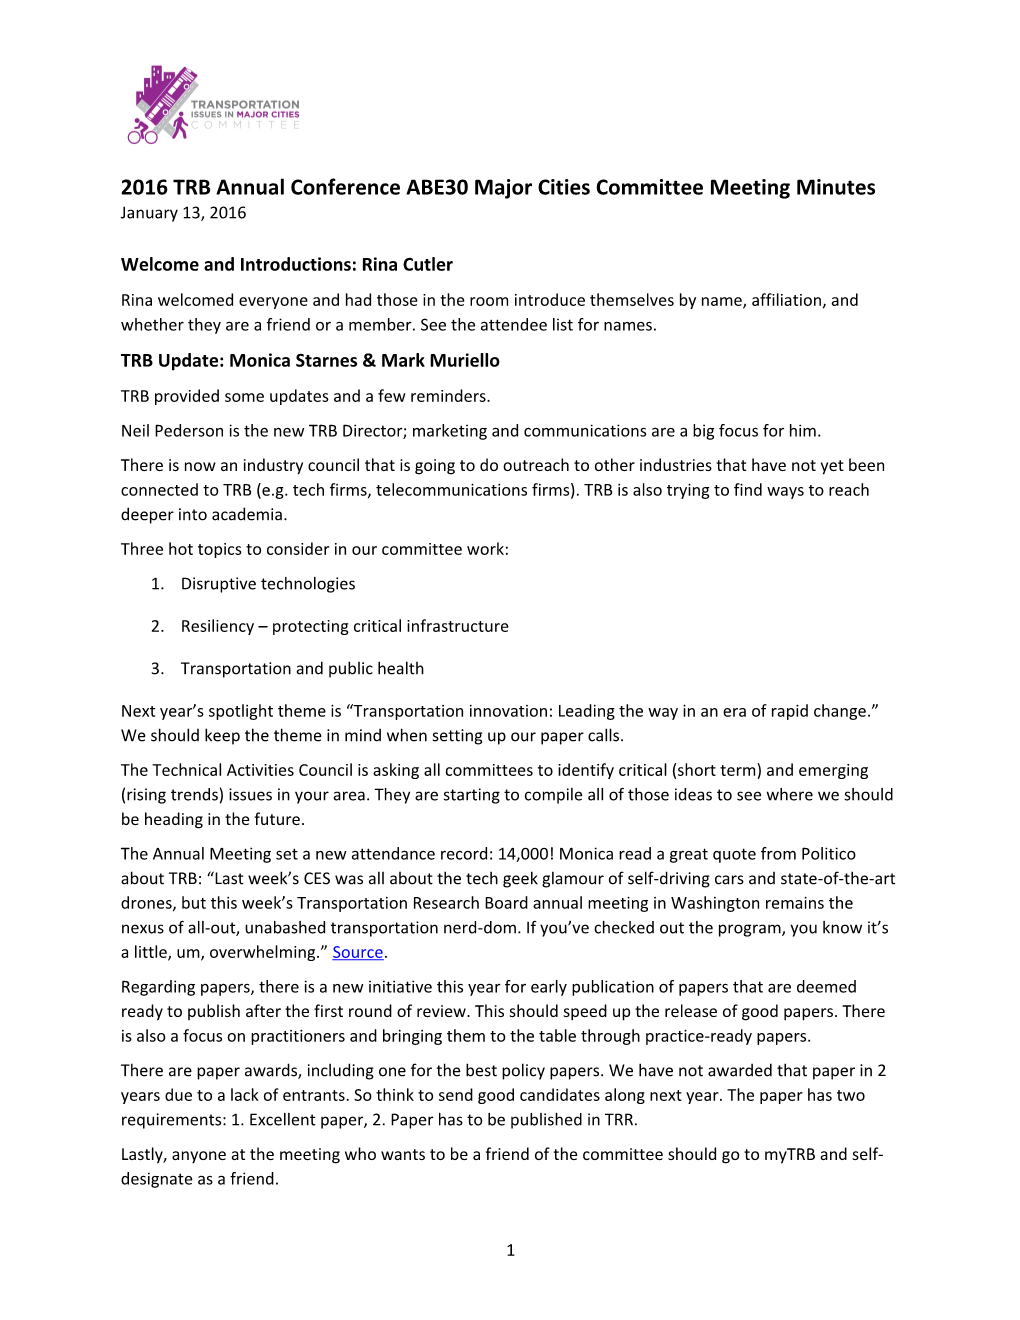 2016 TRB Annual Conference ABE30 Major Cities Committee Meetingminutes